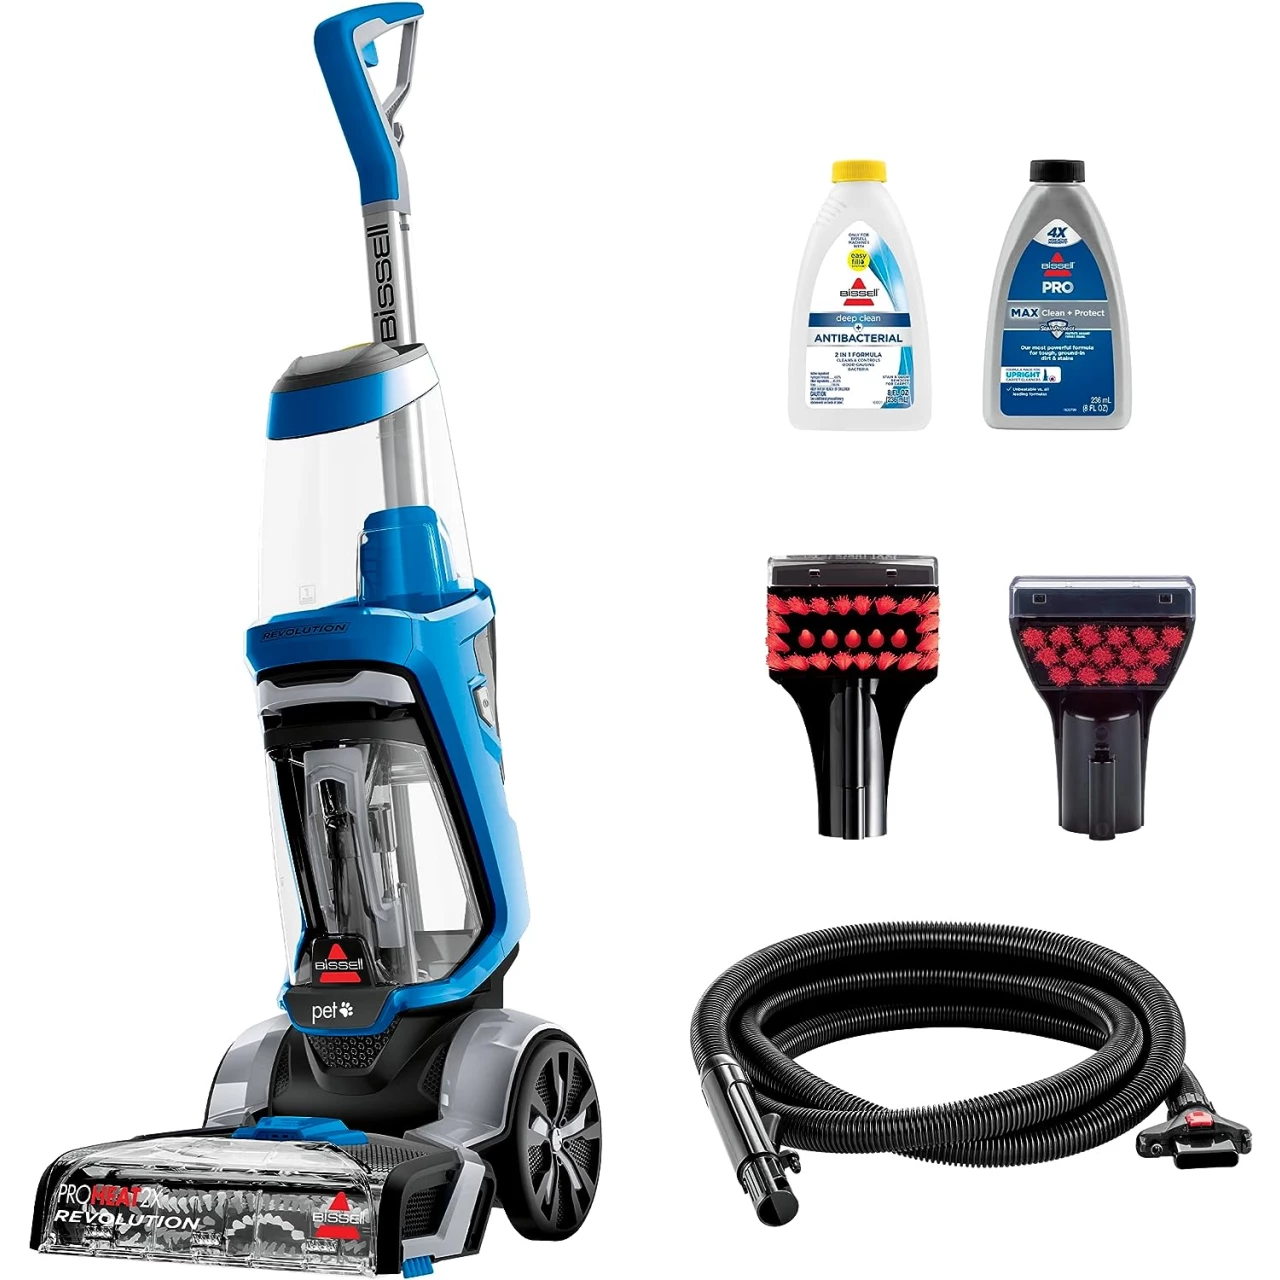 BISSELL ProHeat 2X Revolution Pet, 35799, Upright Deep Cleaner